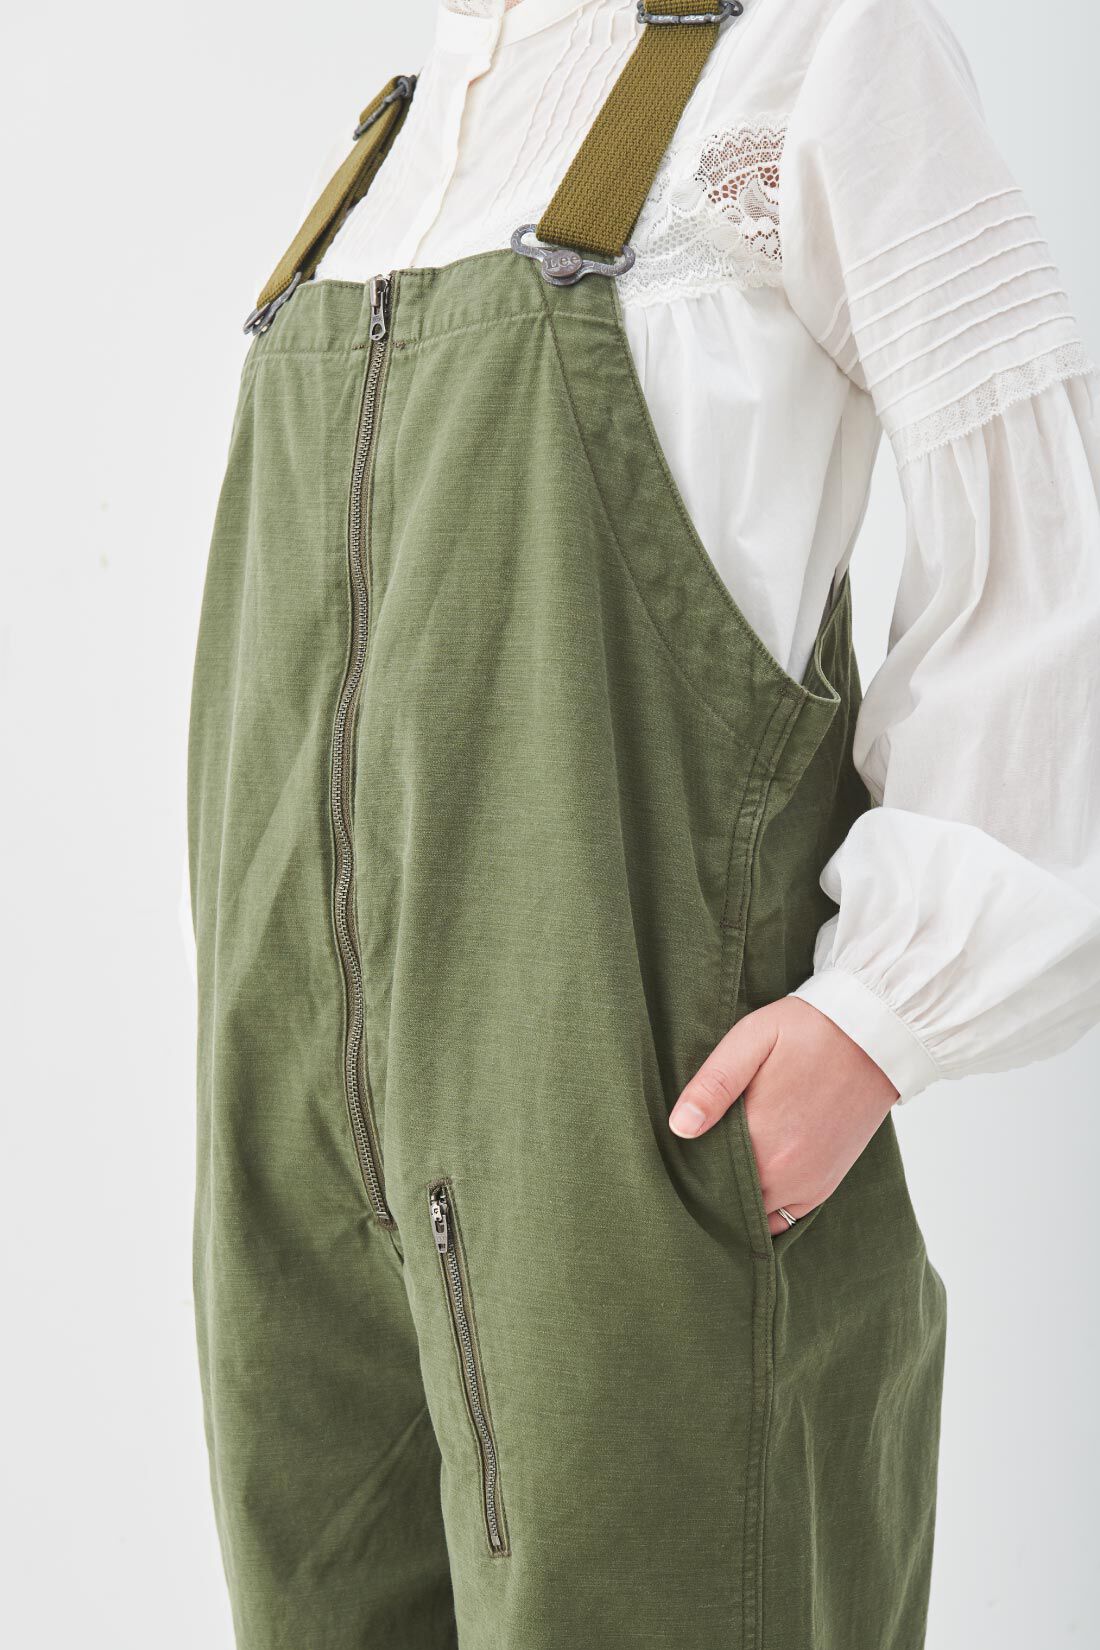 Real Stock|MEDE19F 〈SELECT〉 Lee WORK MILITARY ARMY OVERALL